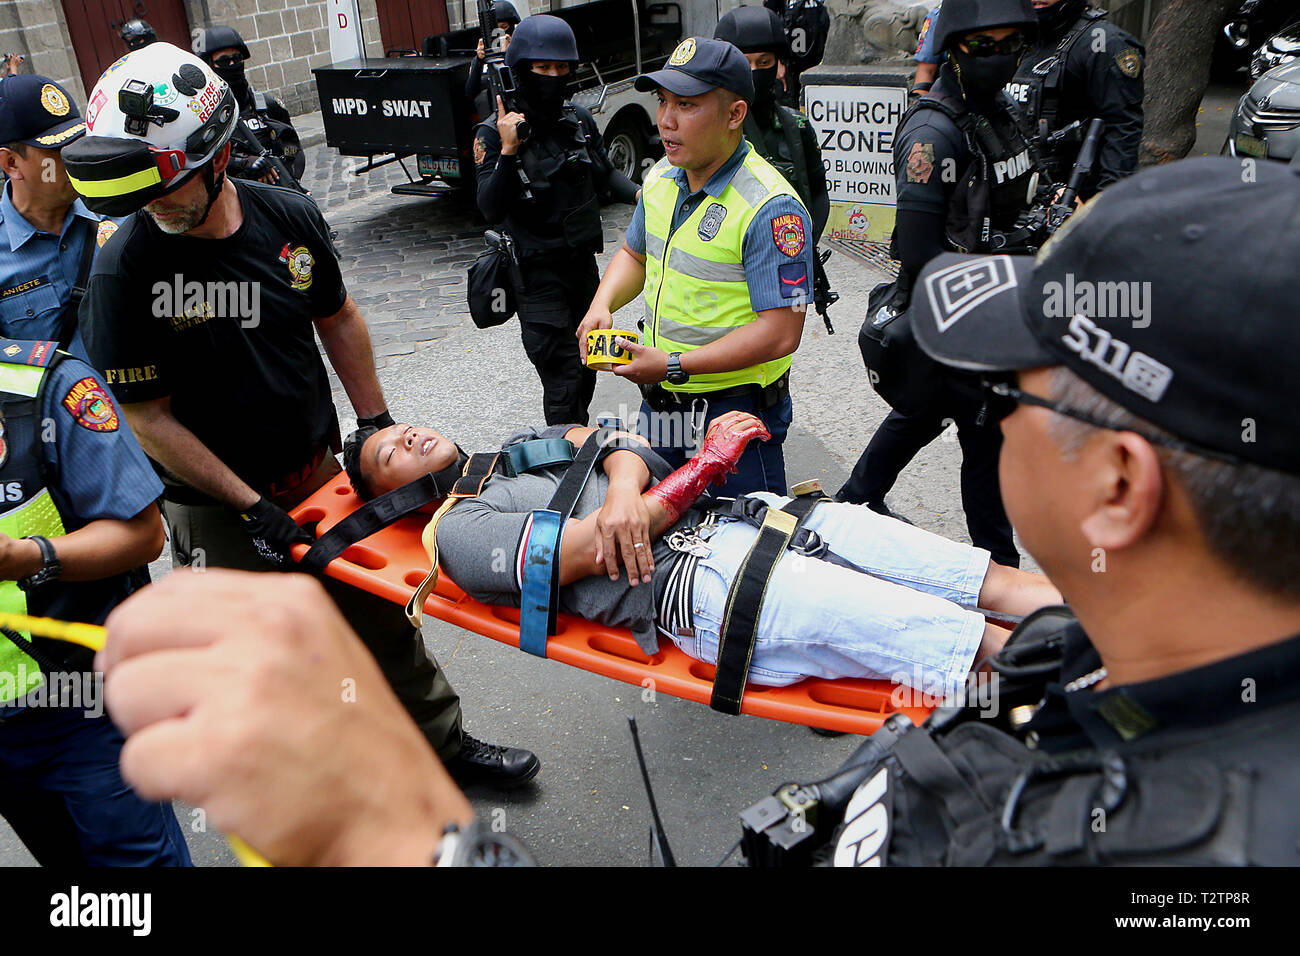 Manila, Philippines. 4th Apr, 2019. Members of the Philippine National Police (PNP) and rescuers carry a mock terrorism victim during an anti-terrorism drill in Manila, the Philippines, April 4, 2019. Philippine security forces have tightened security after Wednesday's blast in southern Philippine Isulan town in Sultan Kudarat province that wounded 18 people at least, a military general said on Thursday. Credit: Rouelle Umali/Xinhua/Alamy Live News Stock Photo